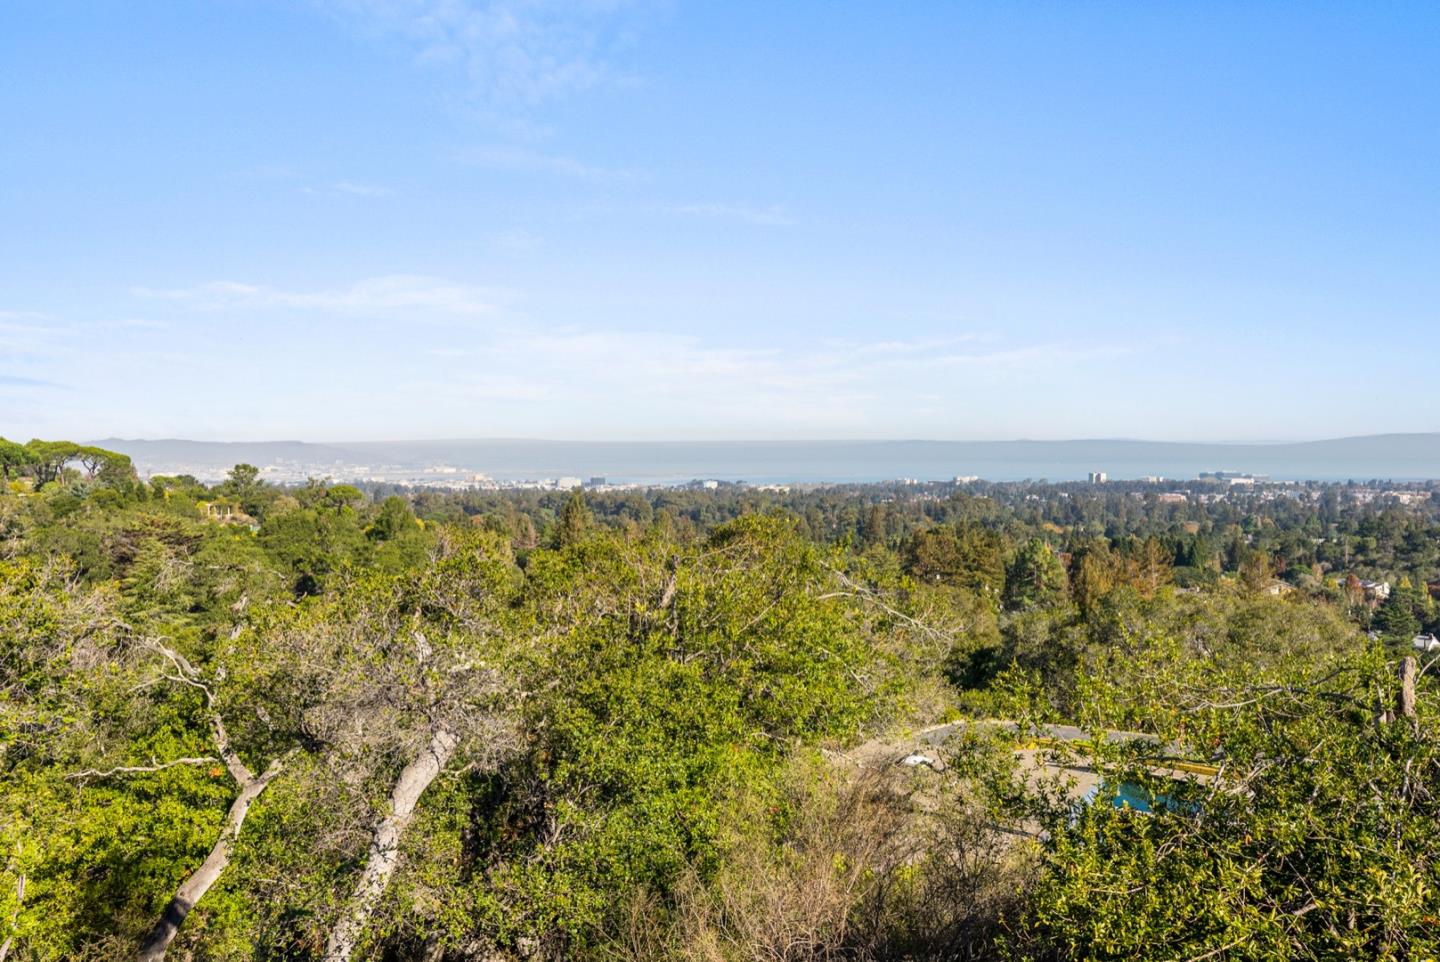 An UNOBSTRUCTED PANORAMIC VIEW like this is hard to find. Down a long private driveway on a nearly 2-acre lot is a 3 bedroom, 2.5 bathroom home remodeled in 2010.